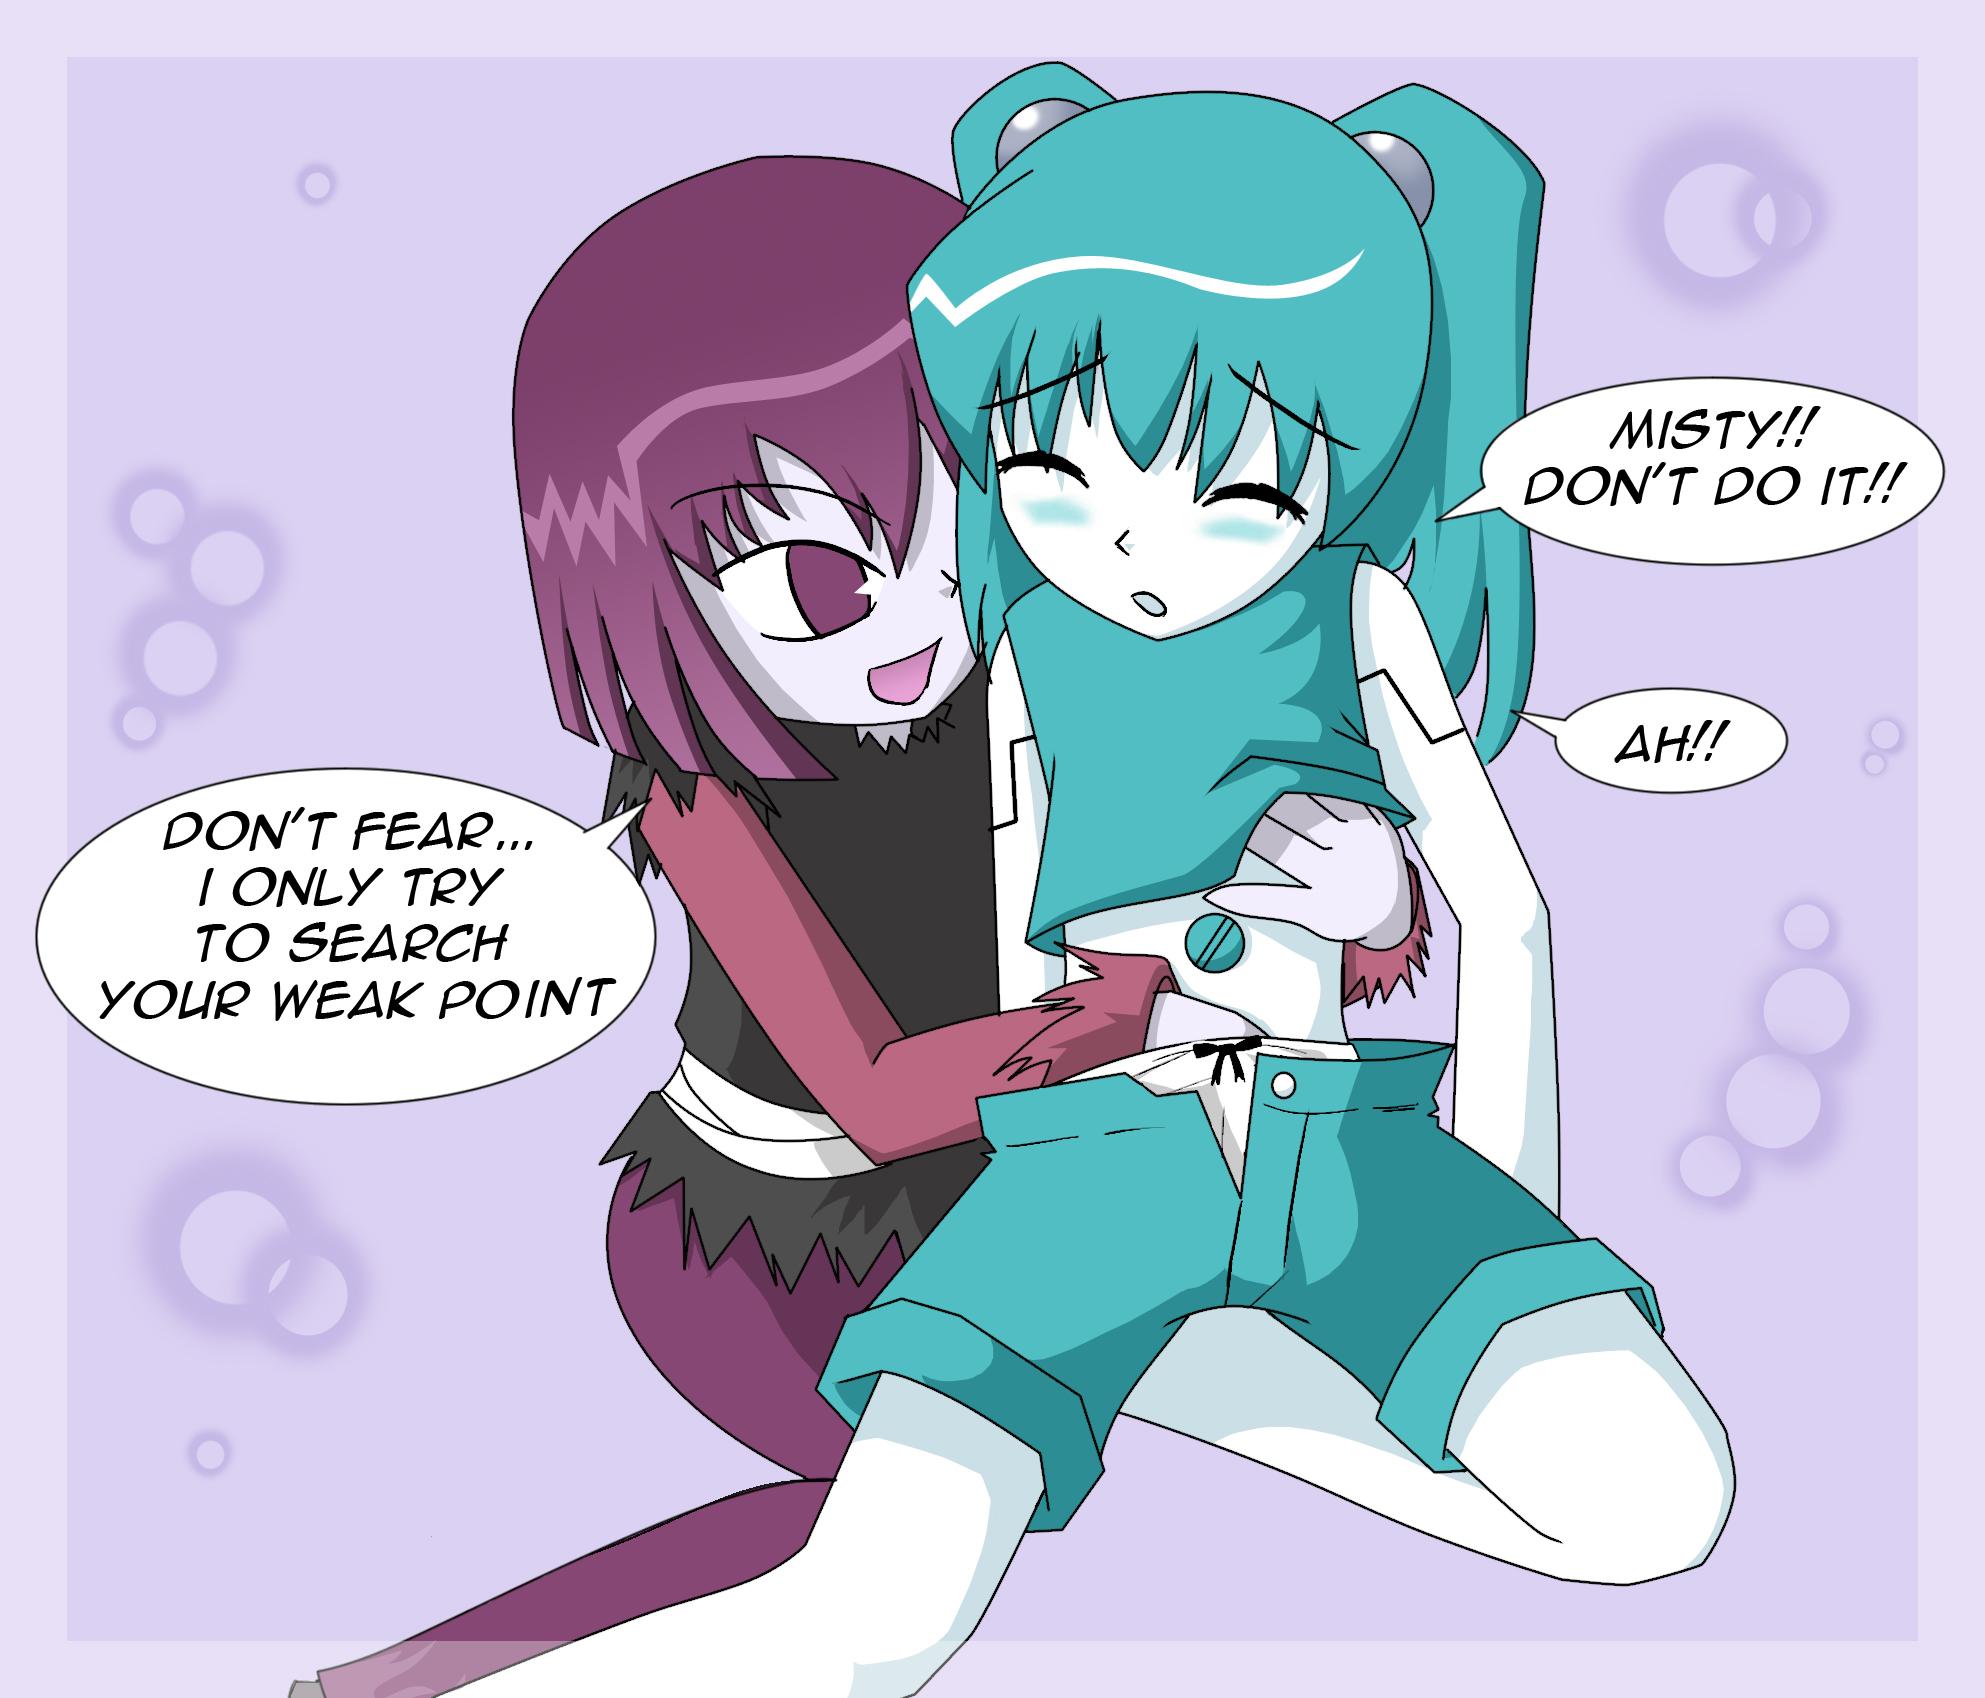 as teenage robot human my life suit a Where is challenge mistress fara